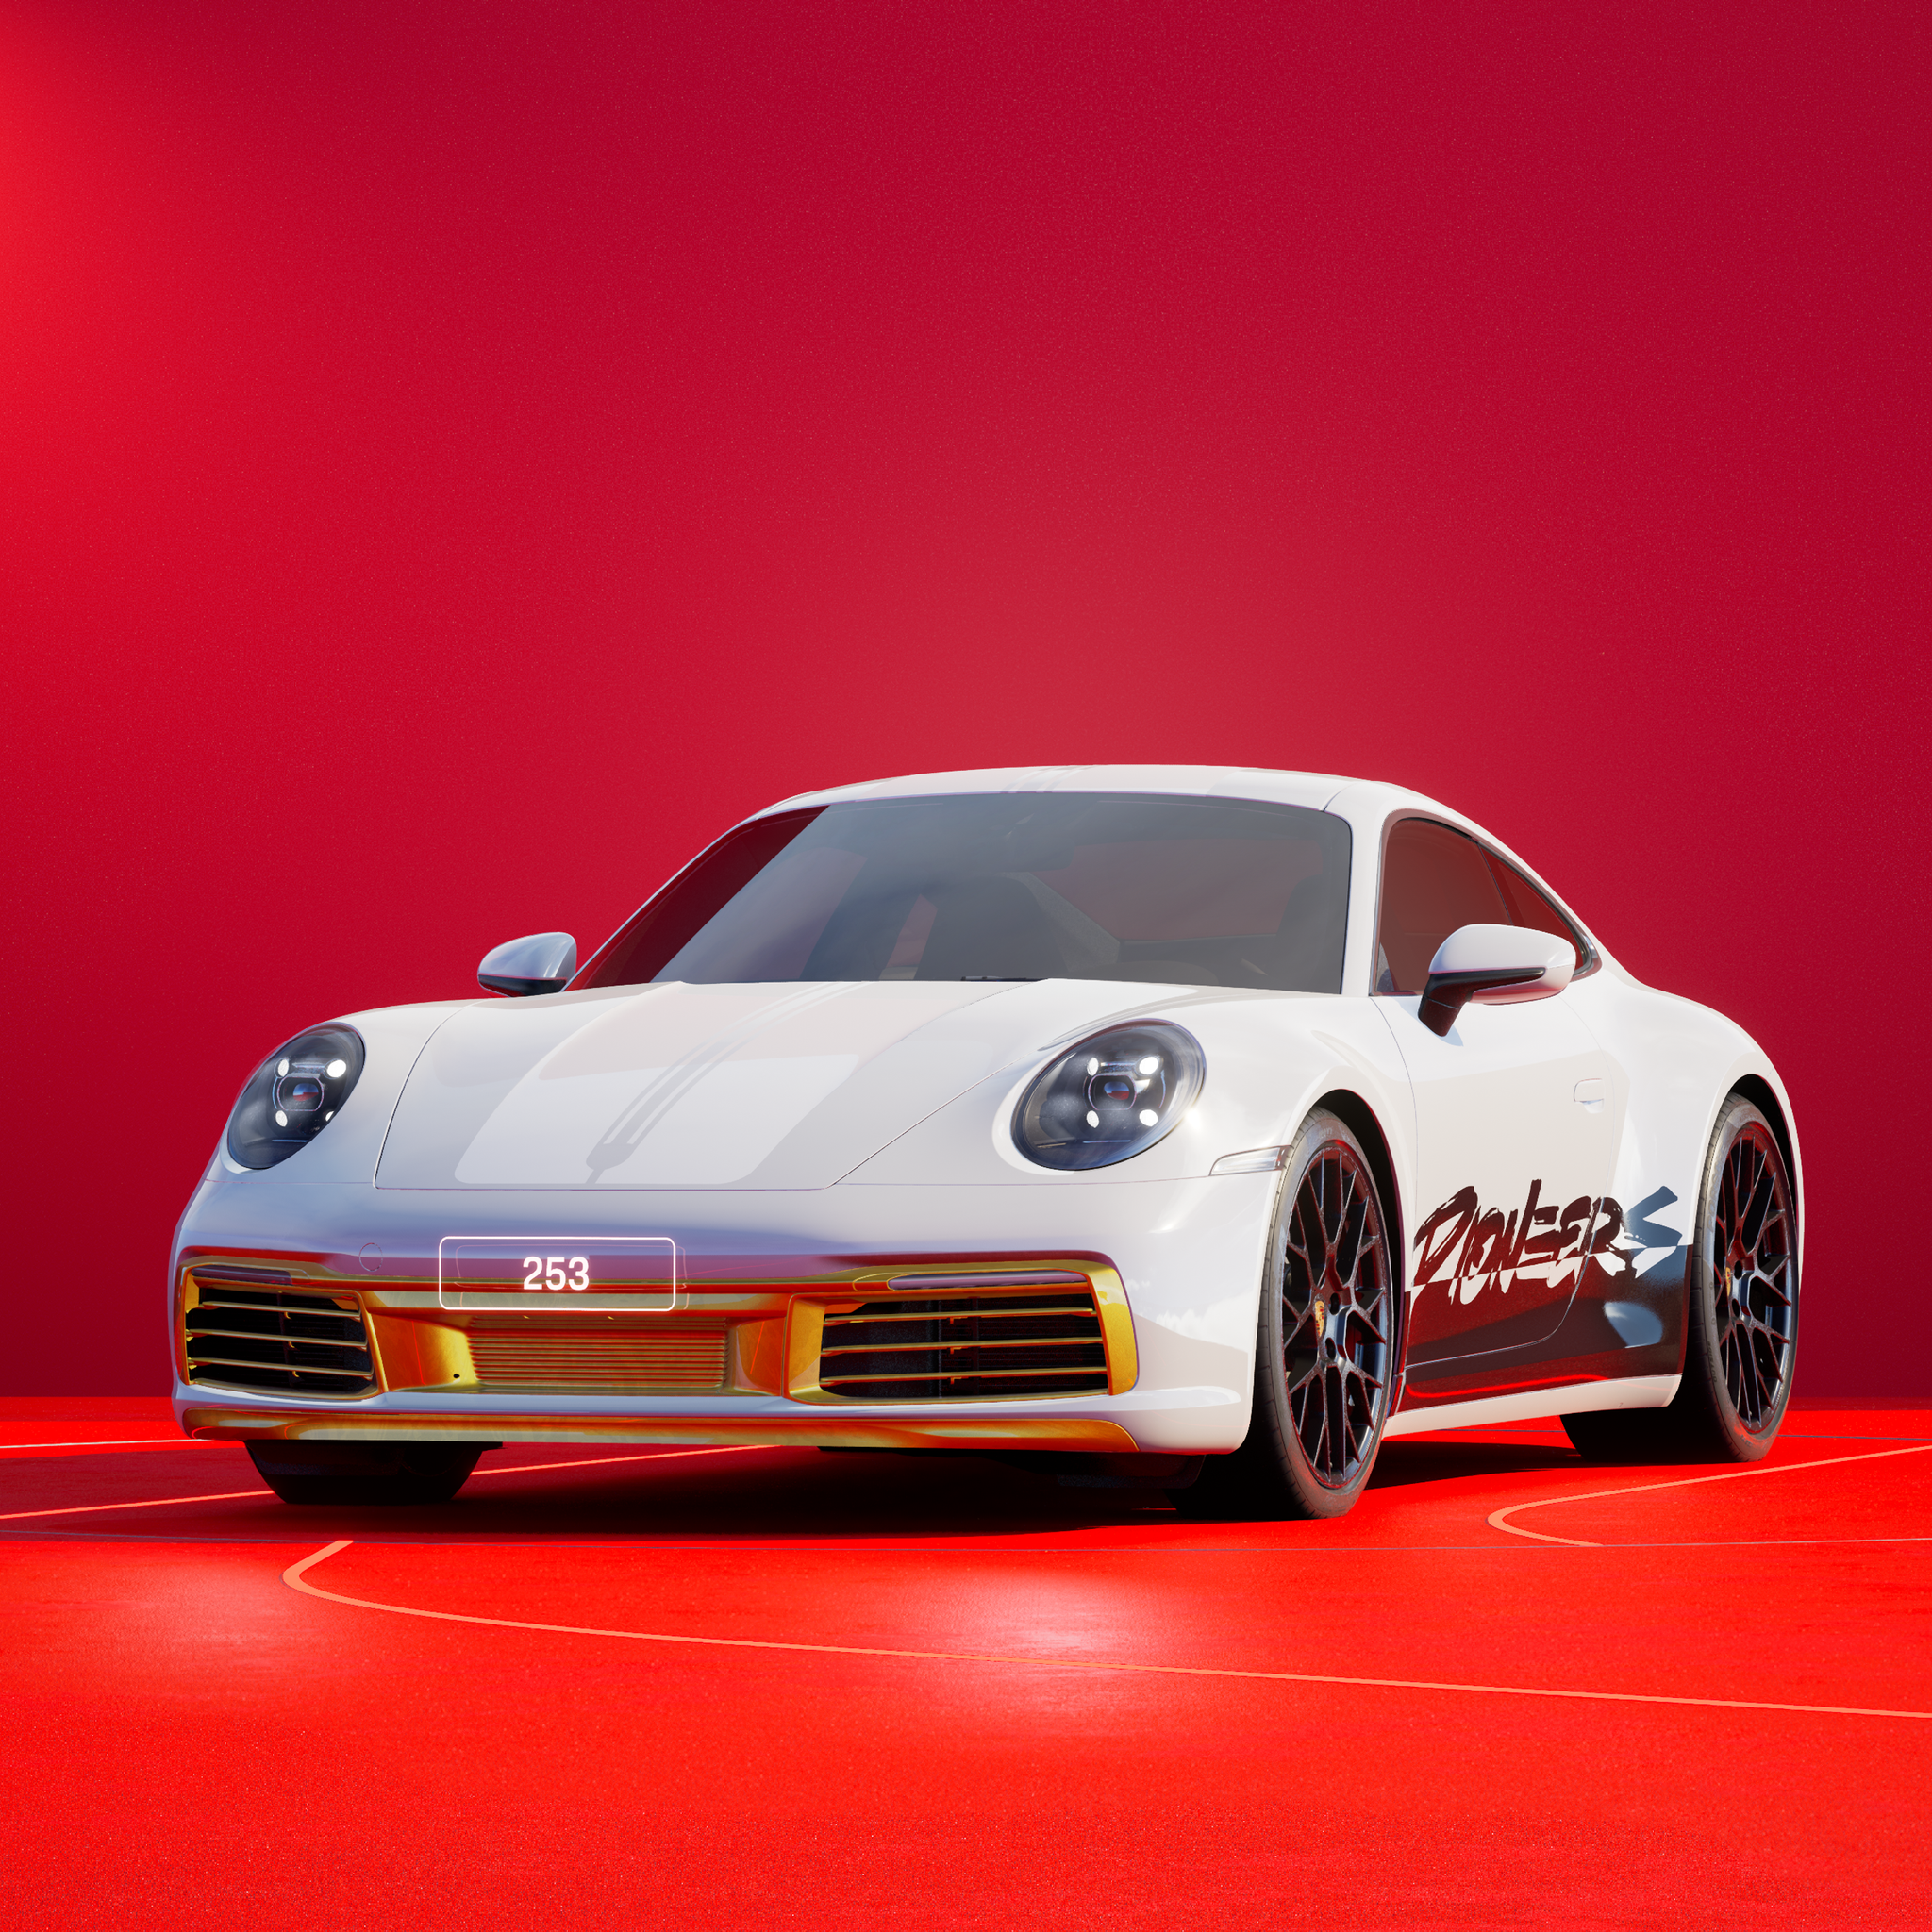 The PORSCHΞ 911 253 image in phase